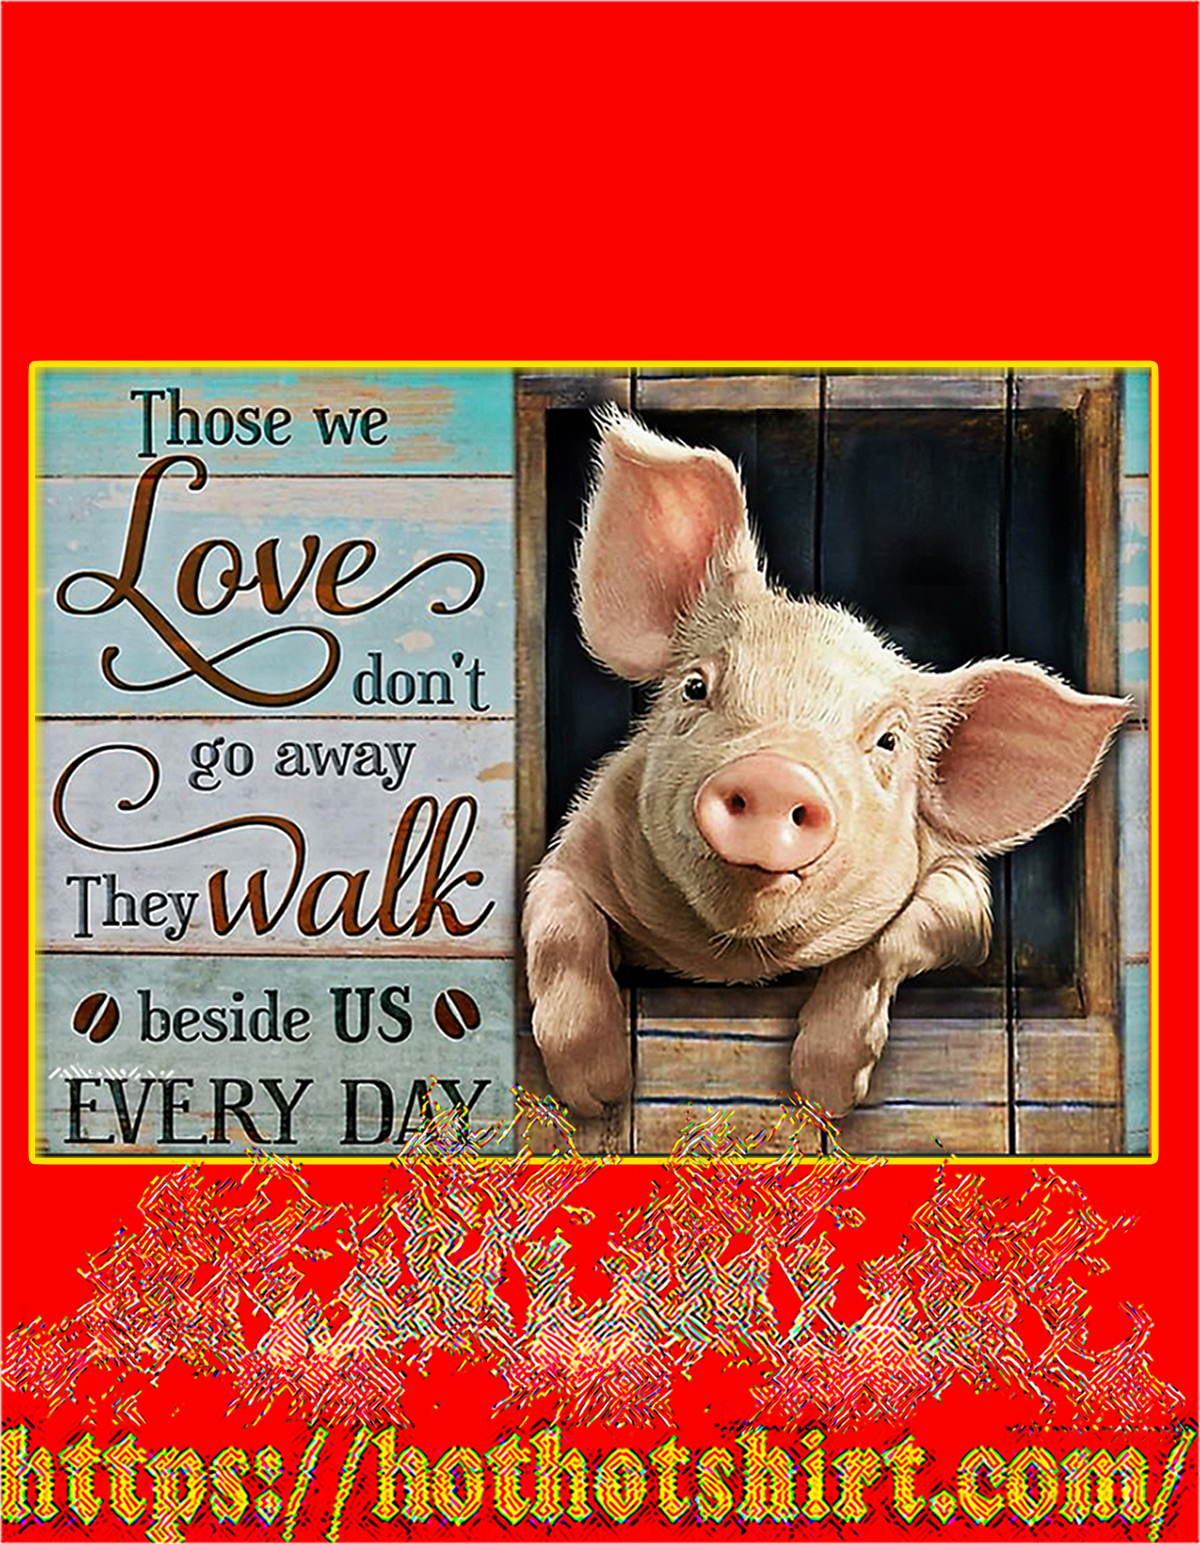 Pig Those we love don’t go away poster